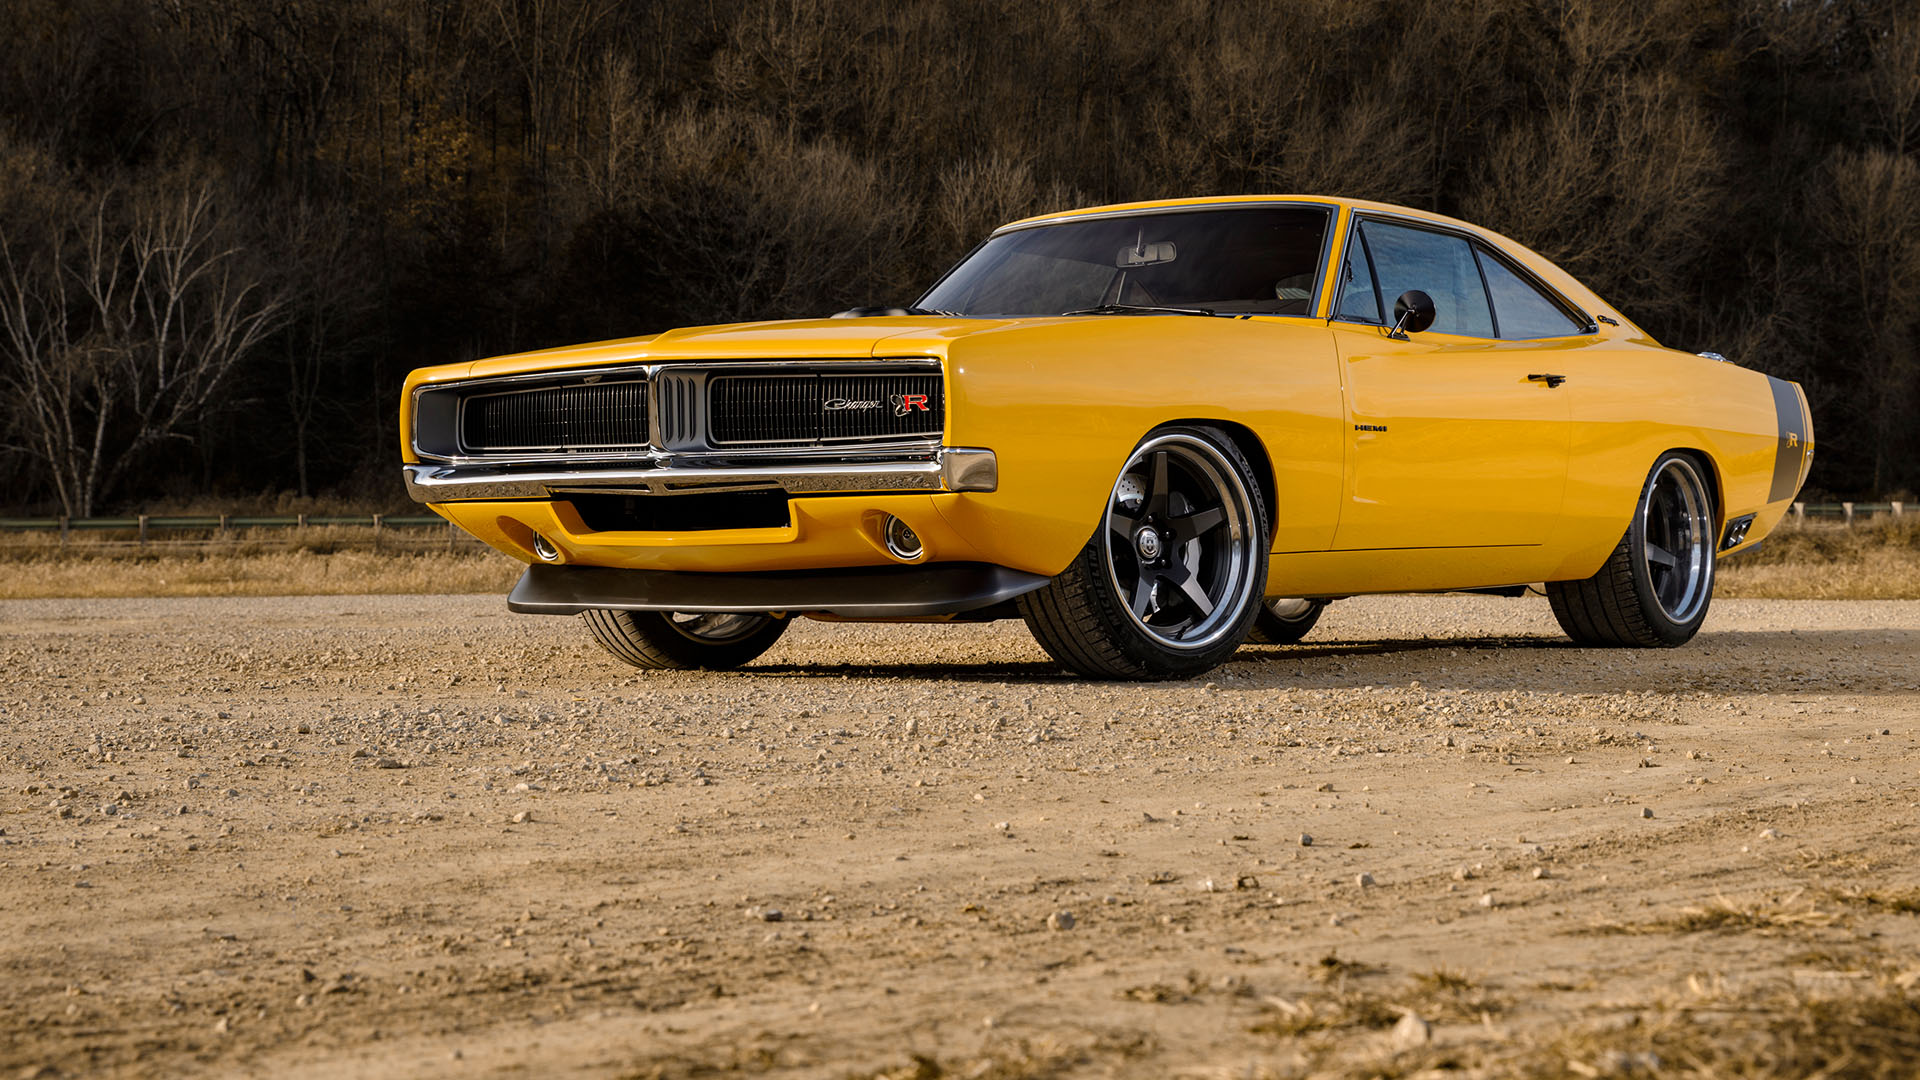 The 1969 Dodge Charger custom build by Ringbrothers